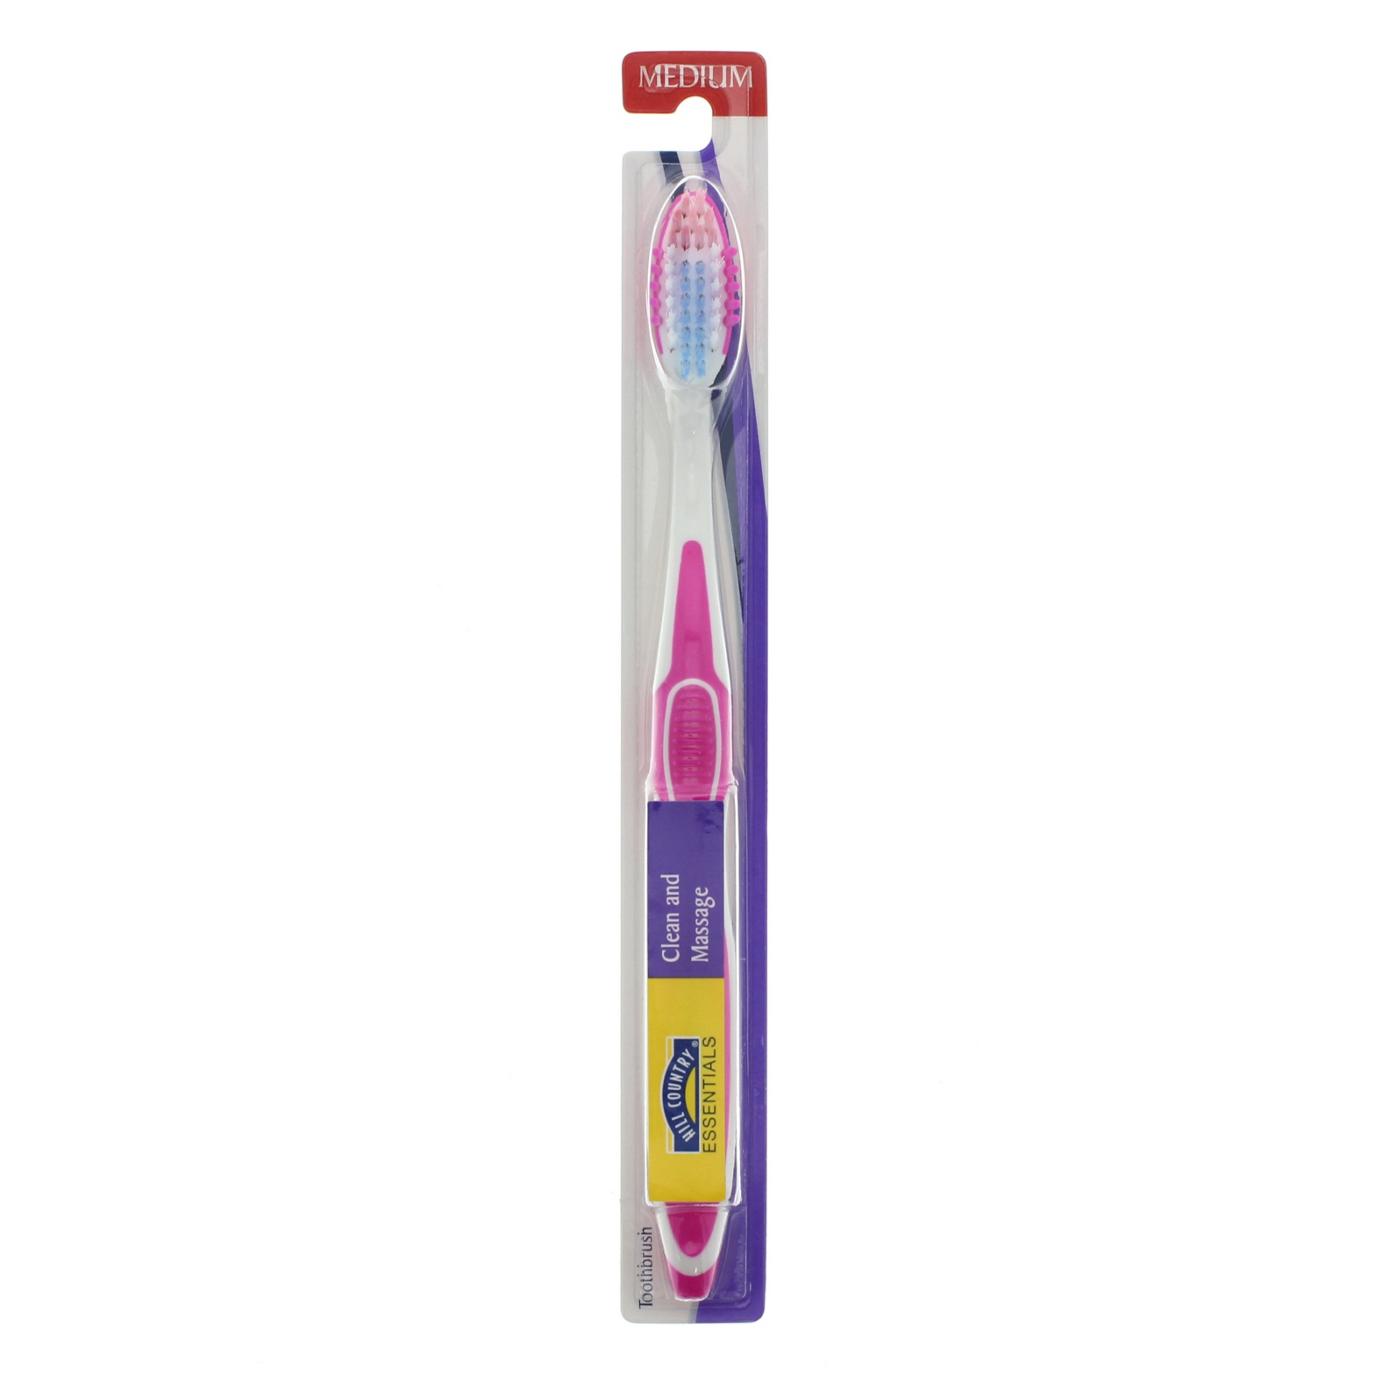 Hill Country Essentials Clean and Massage Medium Toothbrush - Colors May Vary; image 3 of 4